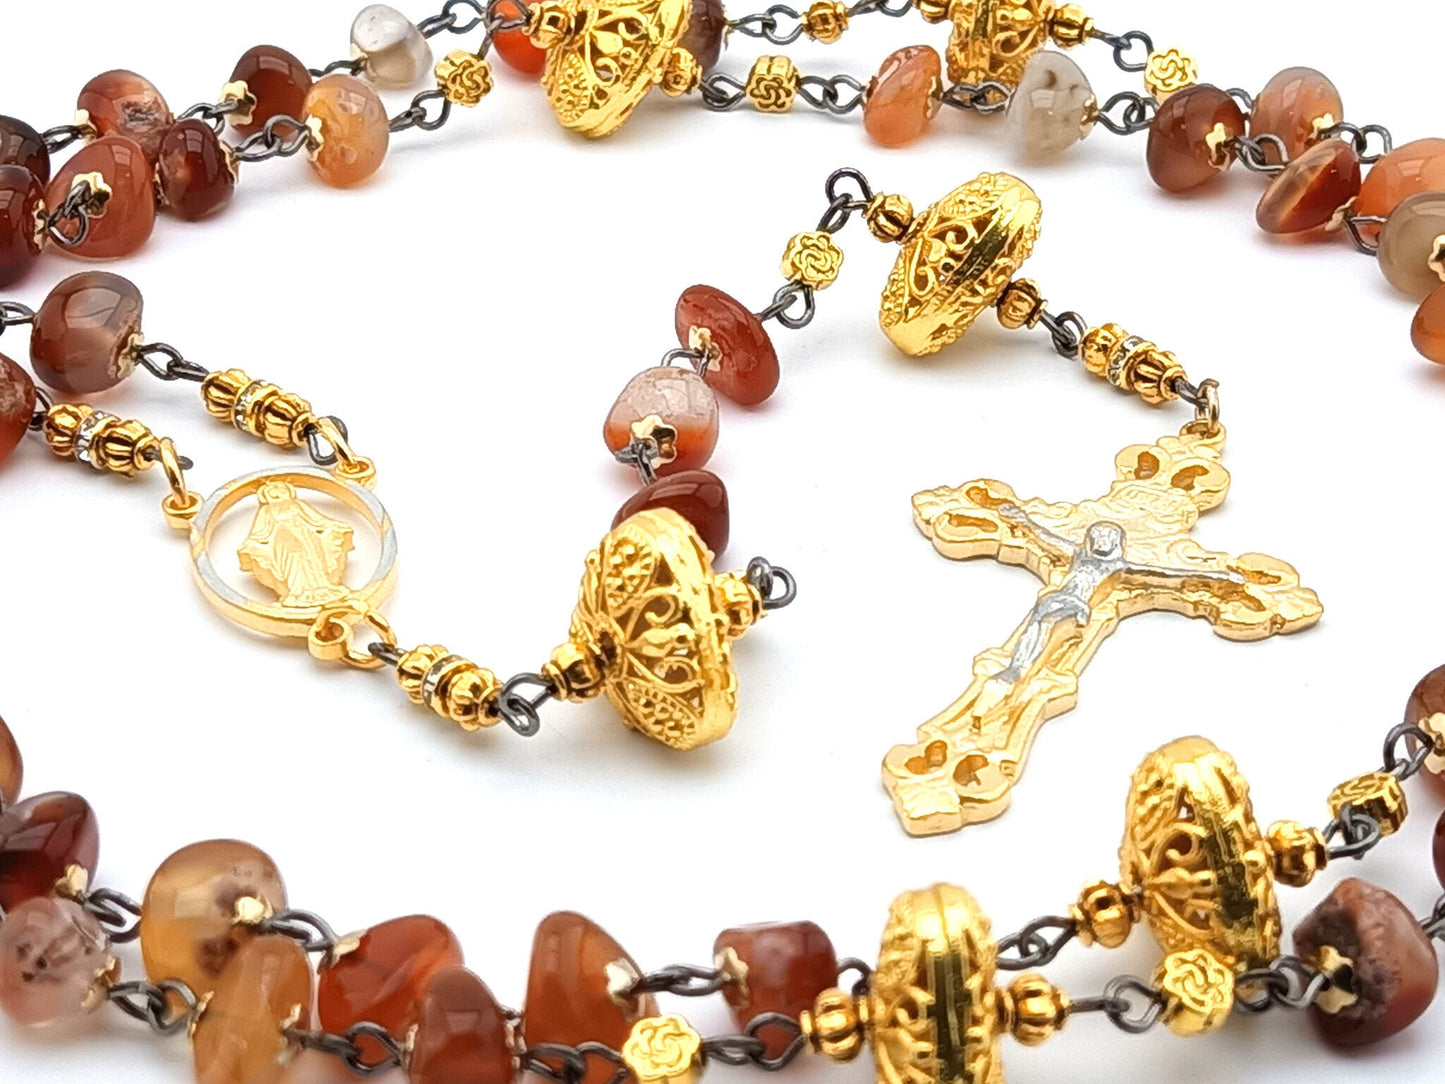 Miraculous Medal unique rosary beads with gold plated pewter crucifix, nugget agate gemstone beads and Miraculous medal centre.